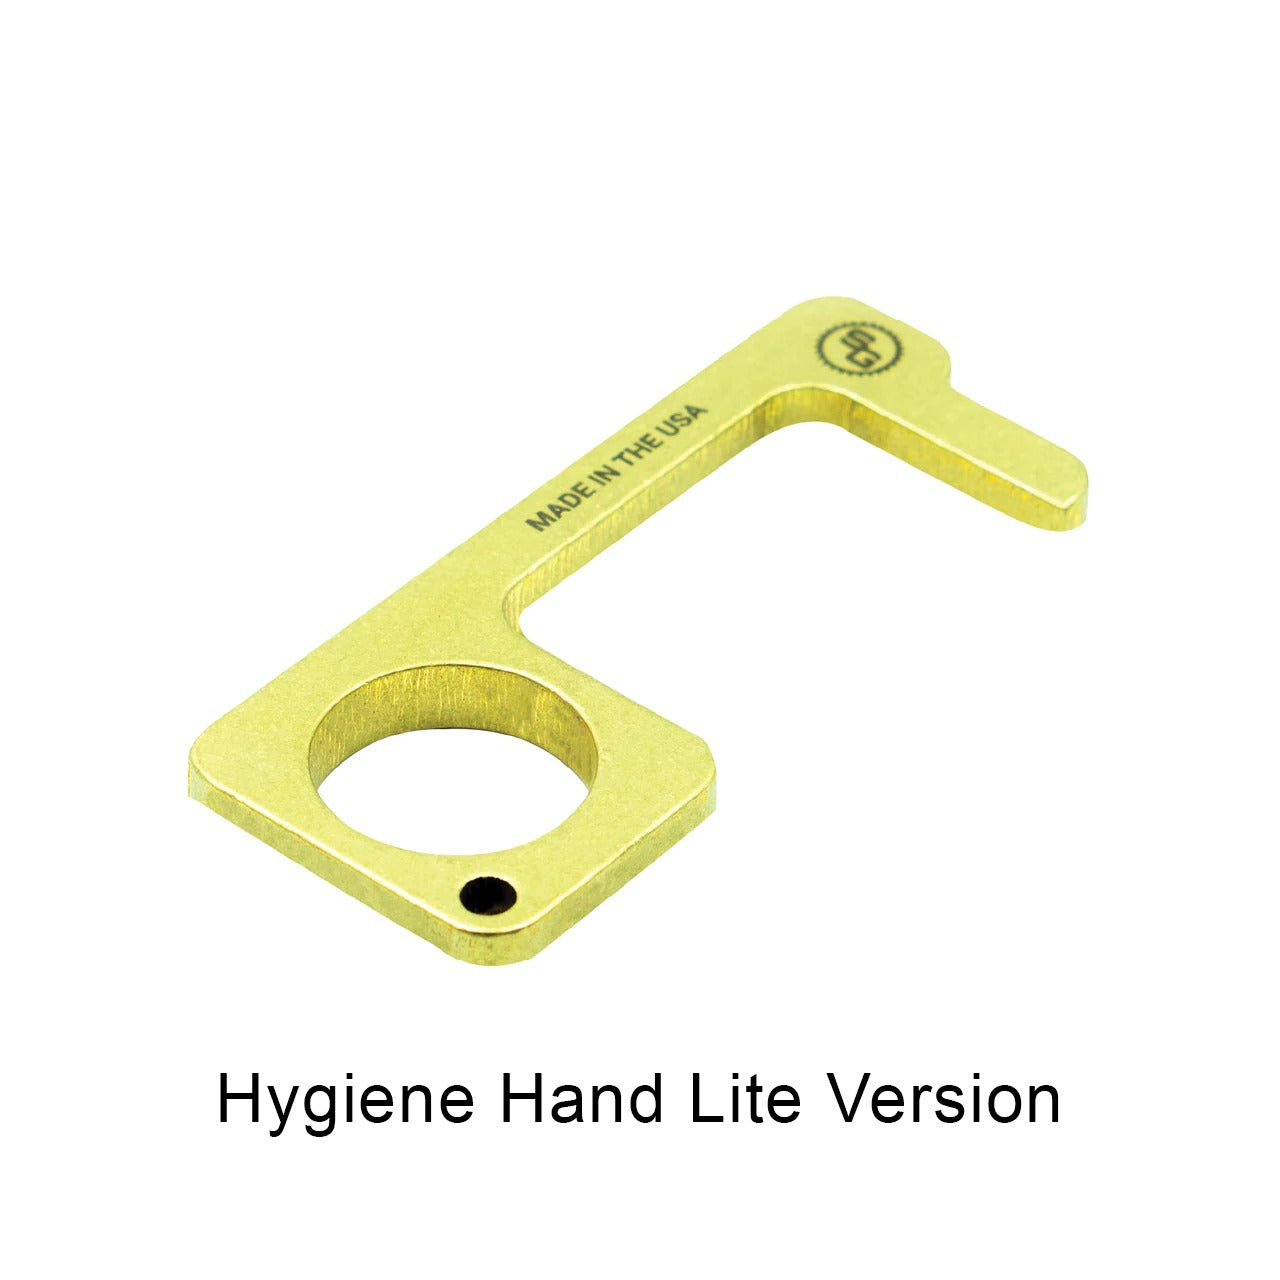 Hygiene Hand - Germ-free way to open doors and push buttons